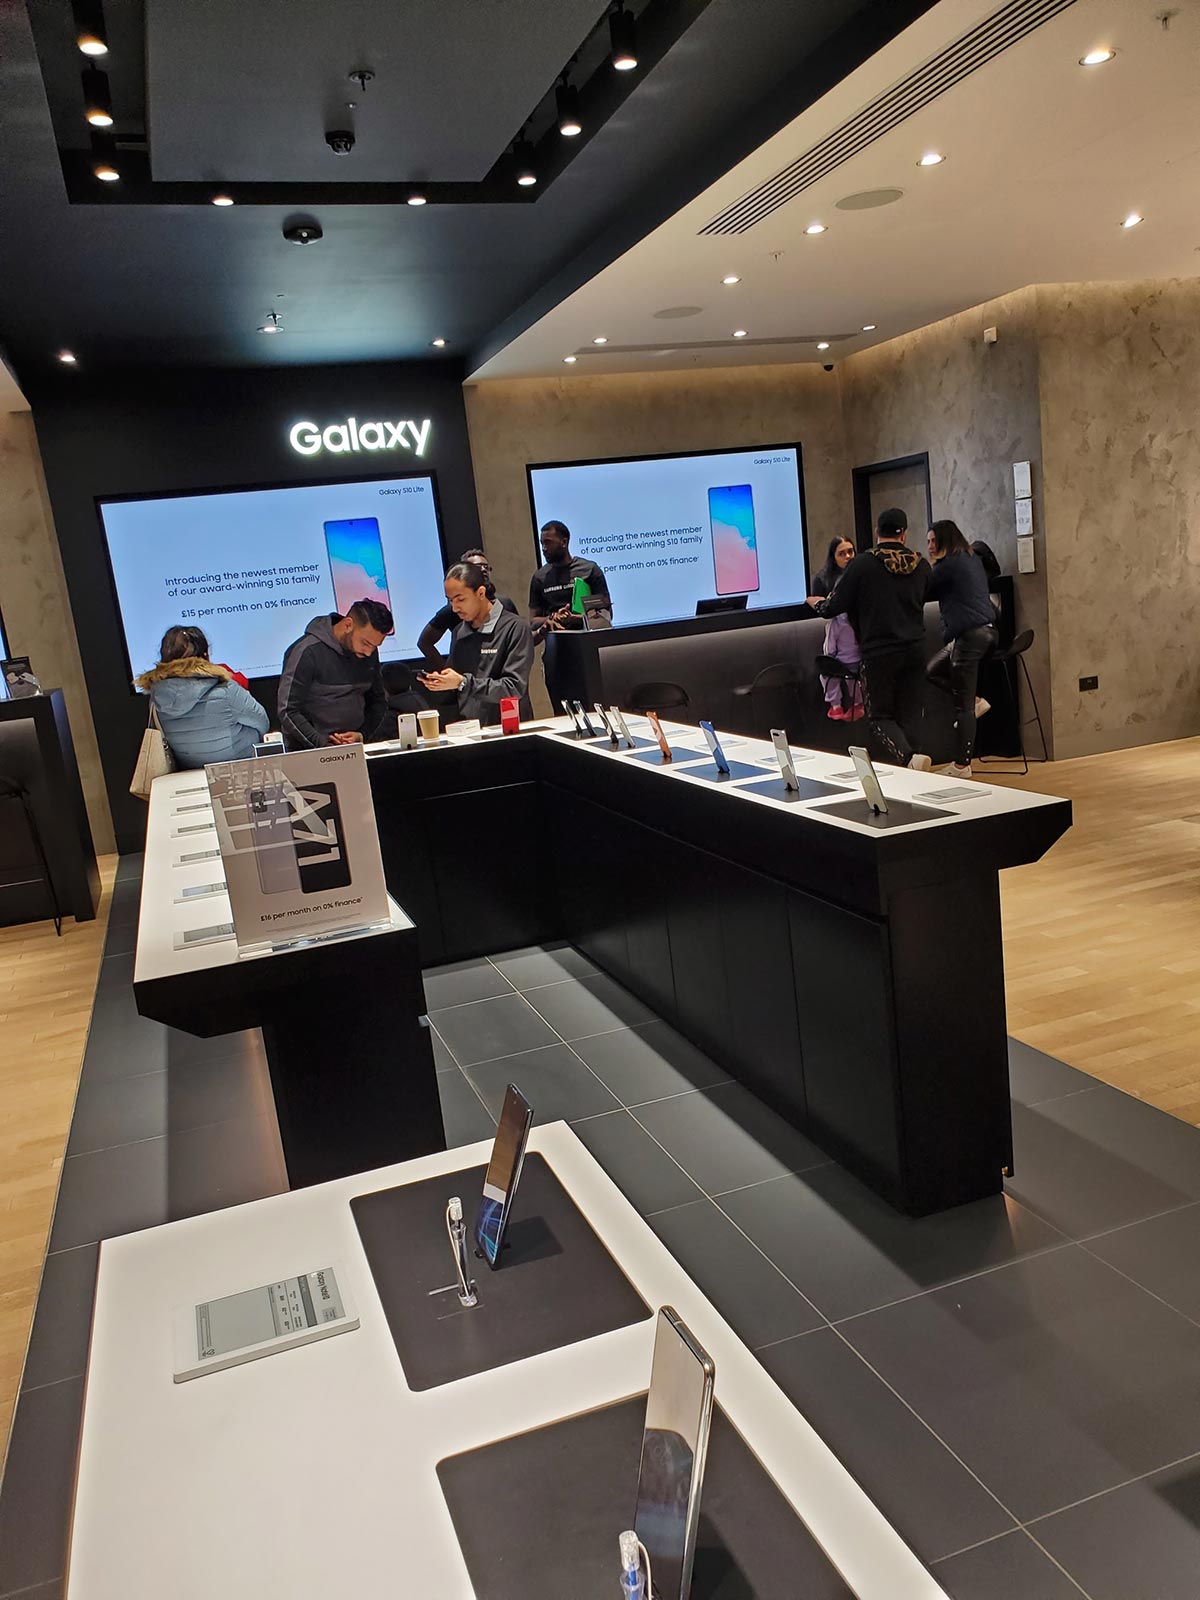 Samsung London Westfield Experience Store